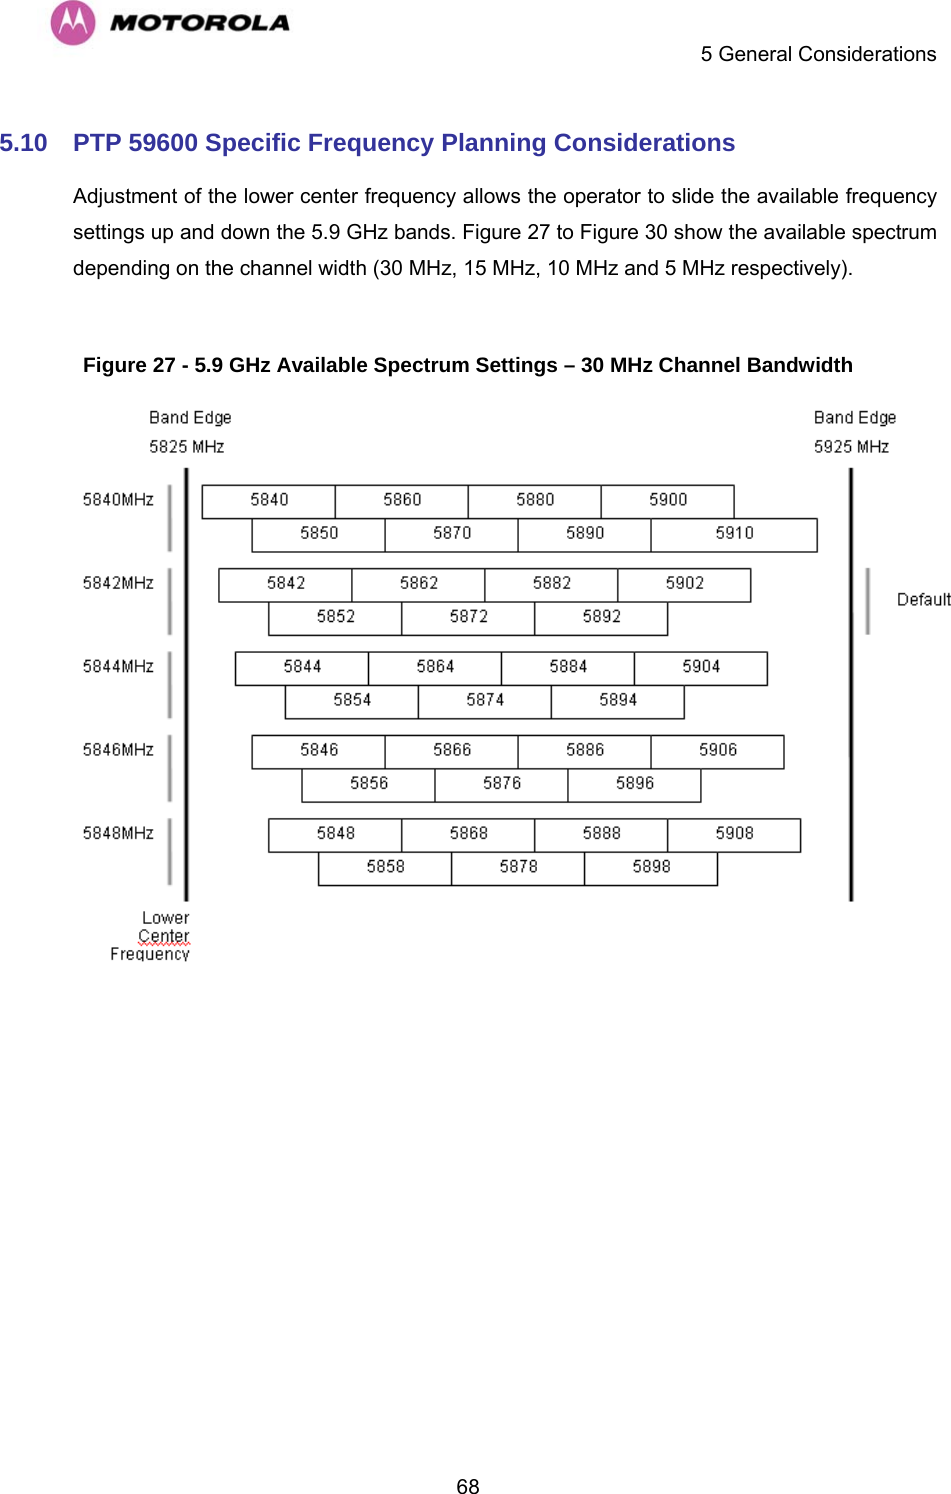    5 General Considerations  685.10  PTP 59600 Specific Frequency Planning Considerations Adjustment of the lower center frequency allows the operator to slide the available frequency settings up and down the 5.9 GHz bands. Figure 27 to Figure 30 show the available spectrum depending on the channel width (30 MHz, 15 MHz, 10 MHz and 5 MHz respectively).  Figure 27 - 5.9 GHz Available Spectrum Settings – 30 MHz Channel Bandwidth  